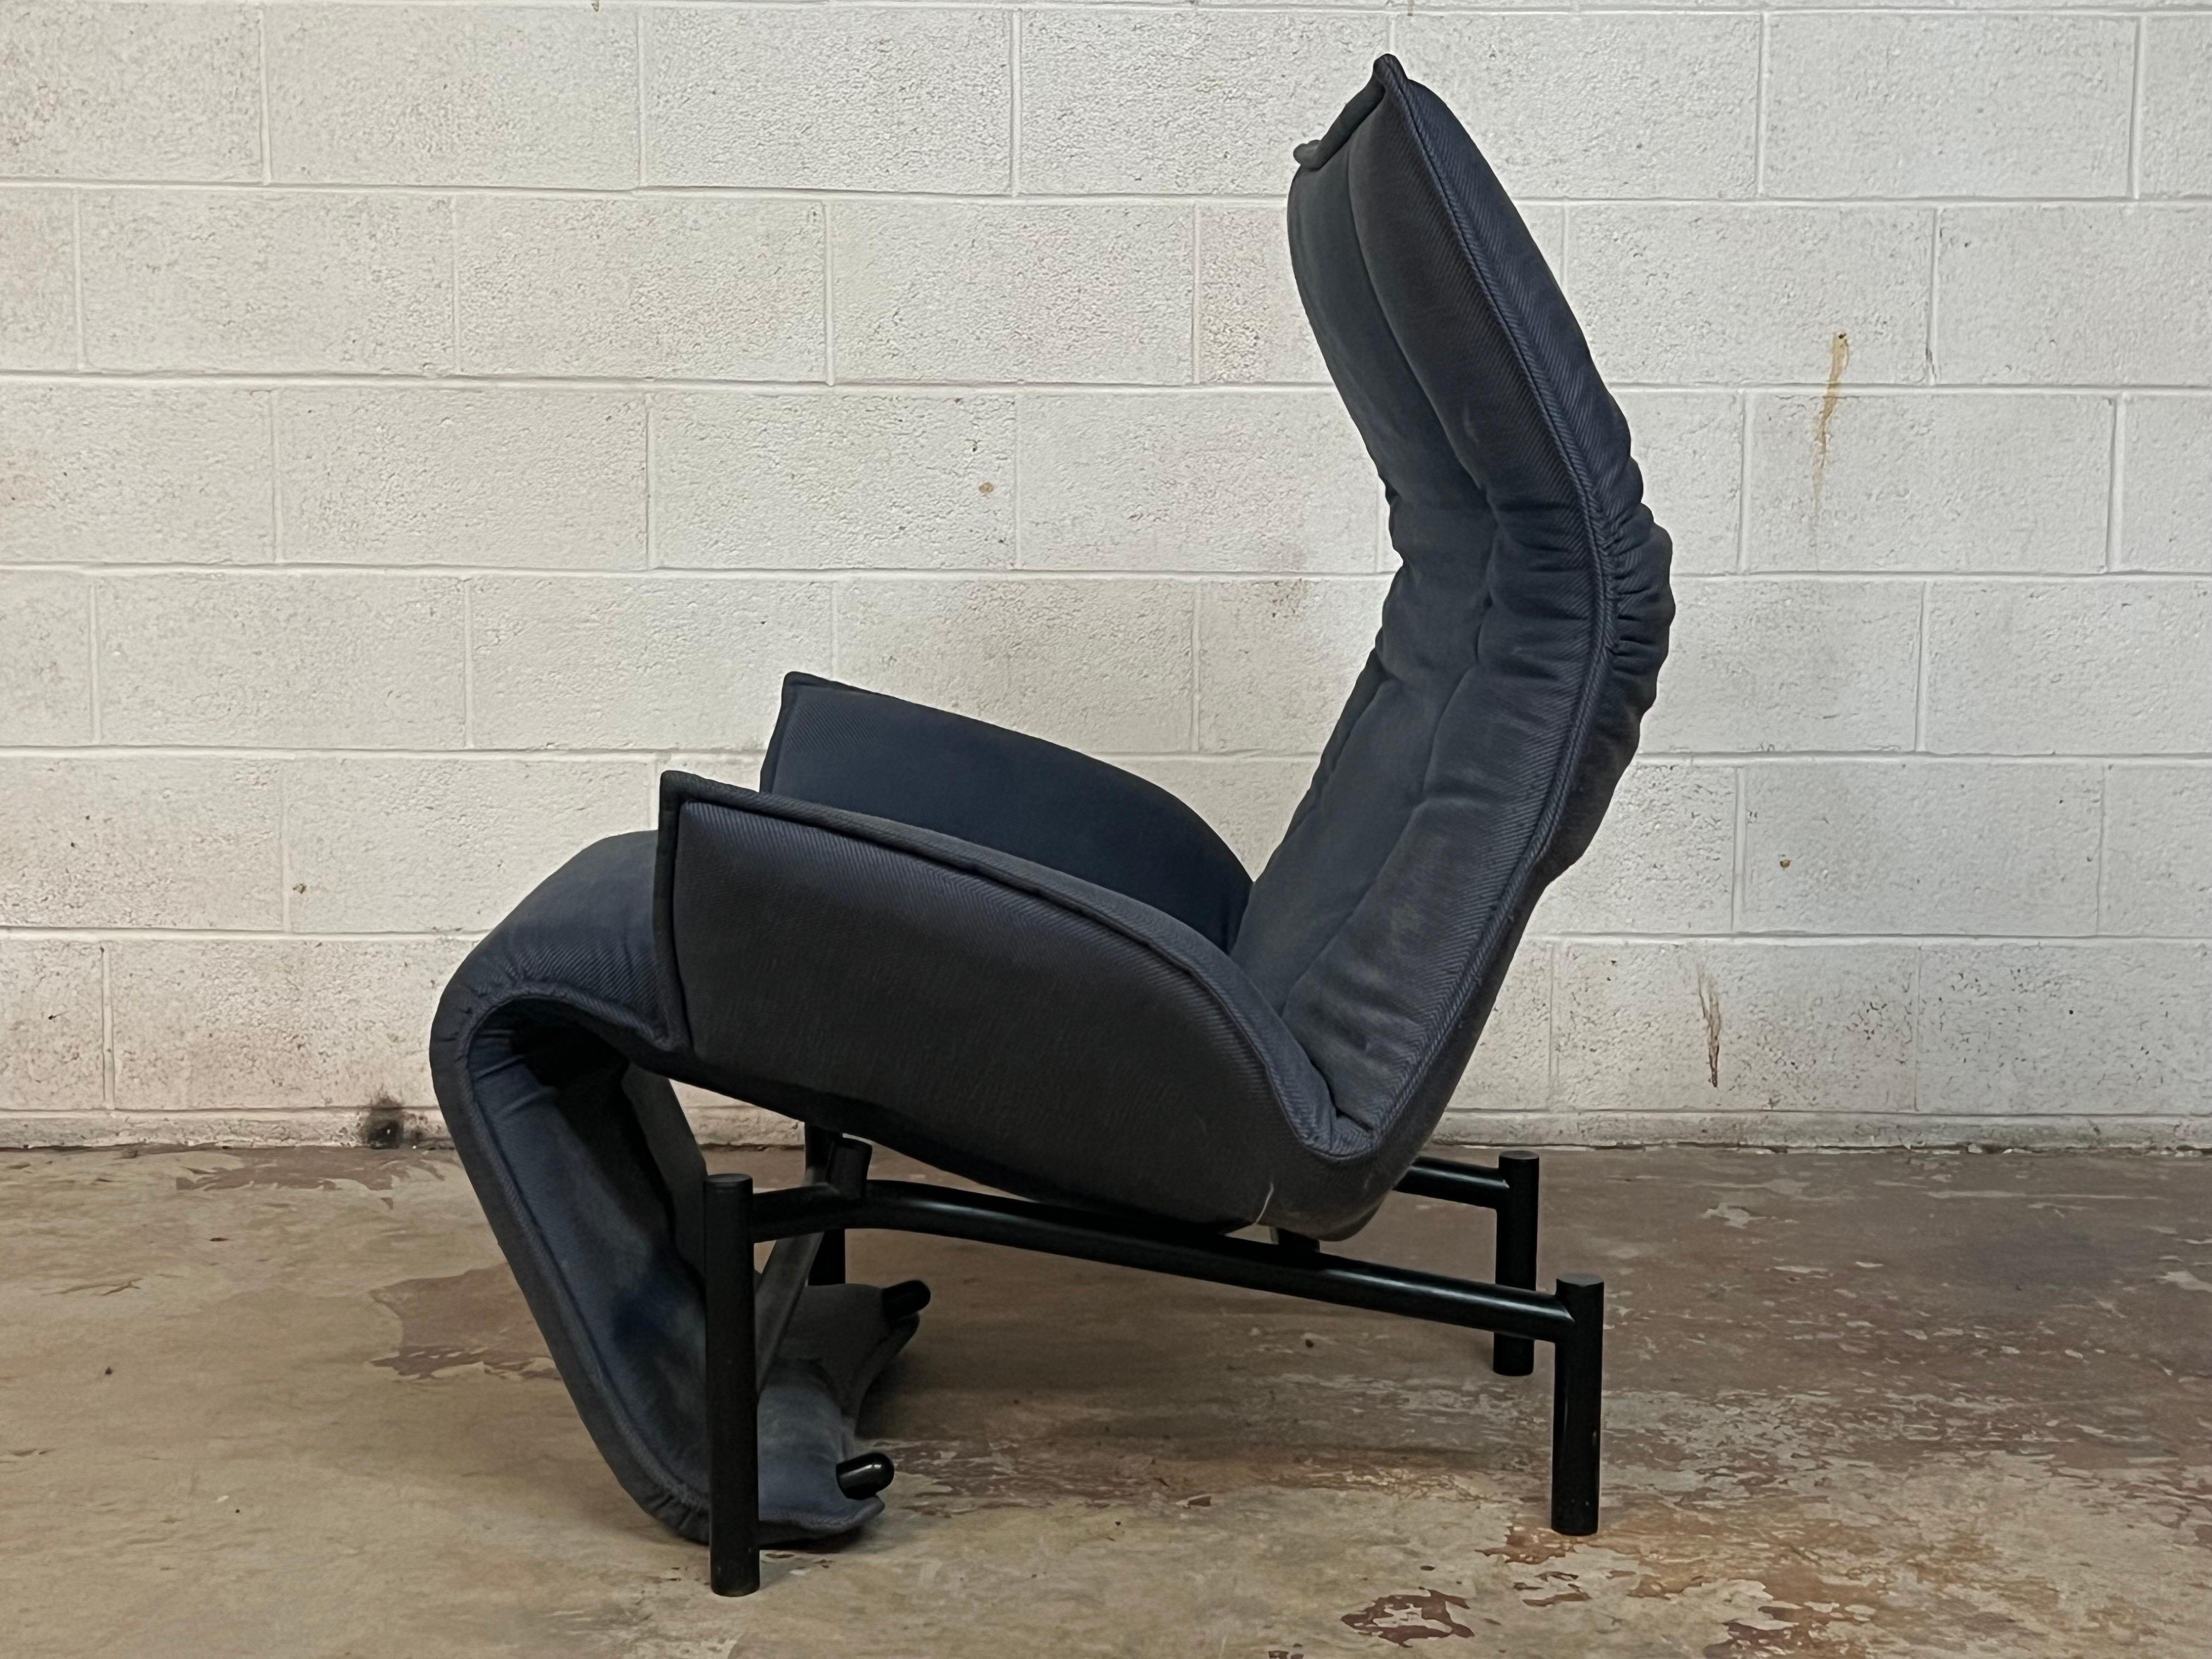 Vico Magistretti “Veranda” Lounge Chair for Cassina, Italy. Made circa 1990s and equipped with original tag. This unique lounge chair has an inner steel frame that allows for the chair to reconfigure its shape and seating position. Footrest can flip